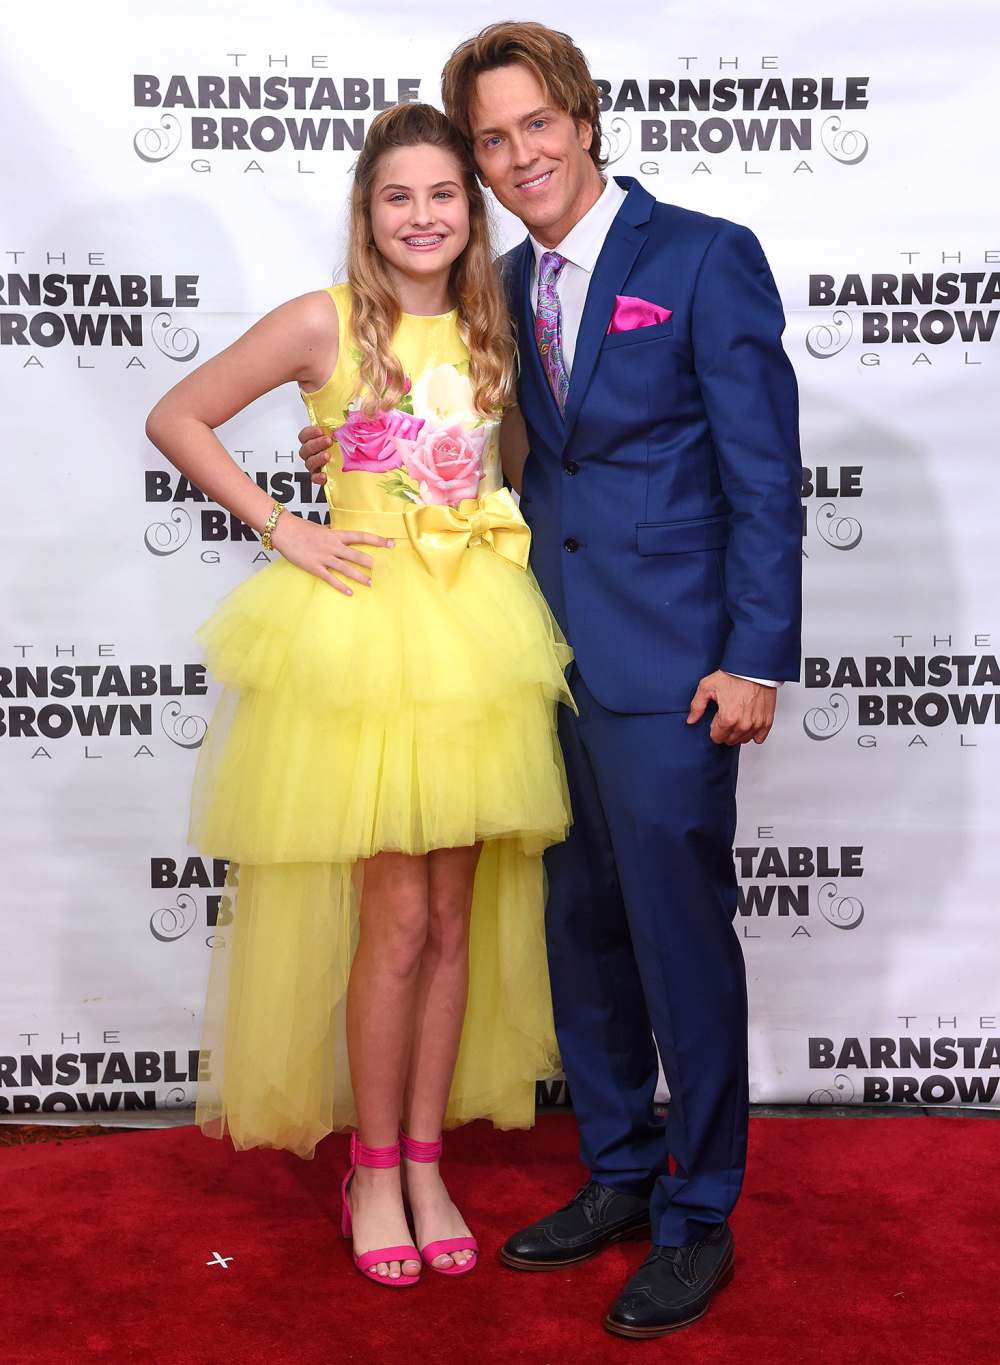 Larry Birkhead Reveals How Daughter Danniellynn Reminds Him of Anna Nicole Smith Barnstable Brown Kentucky Derby Eve Gala